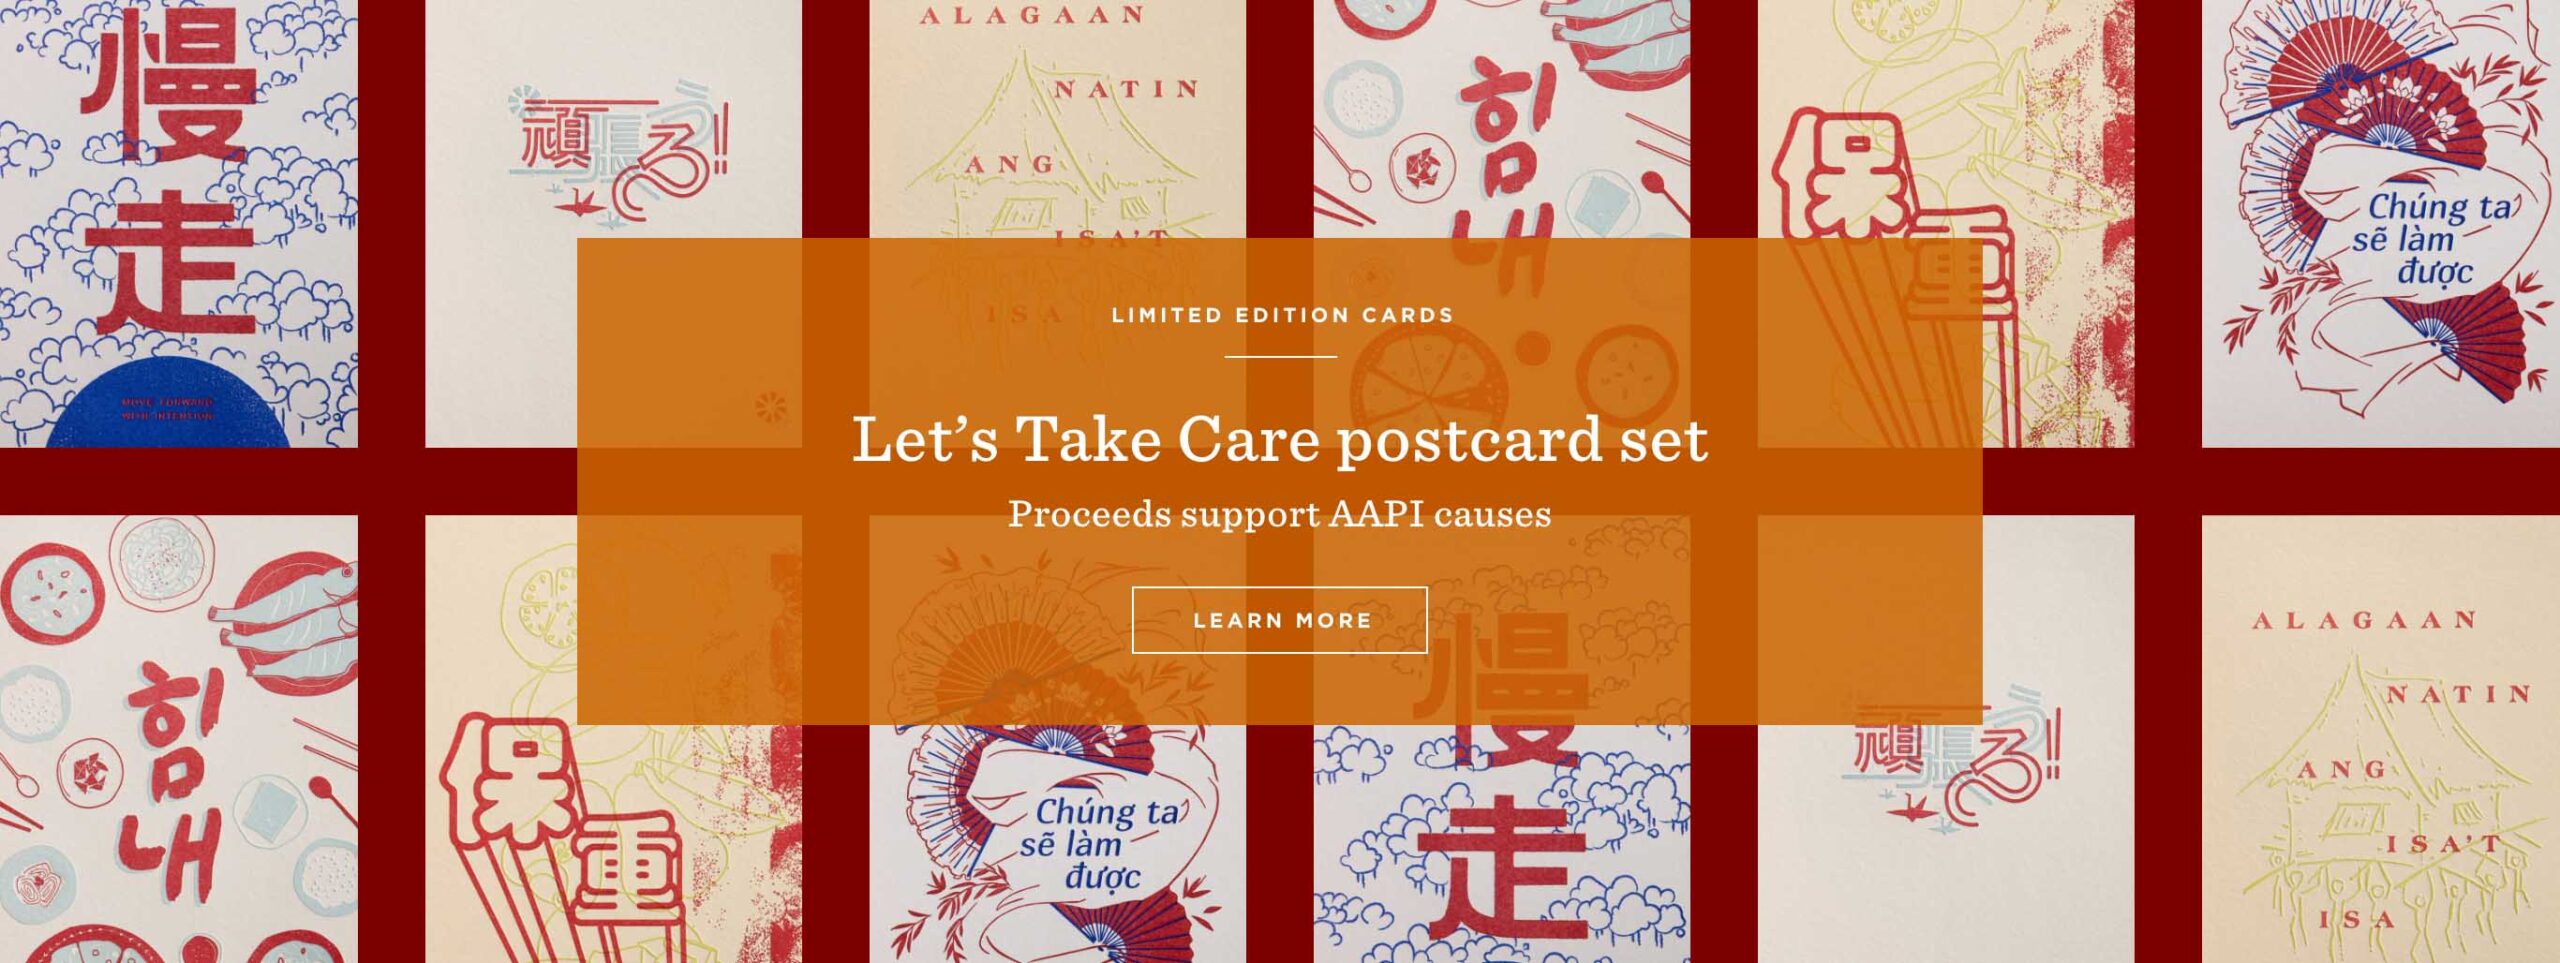 Limited Edition Let's Take Care postcard set, proceeds support AAPI causes